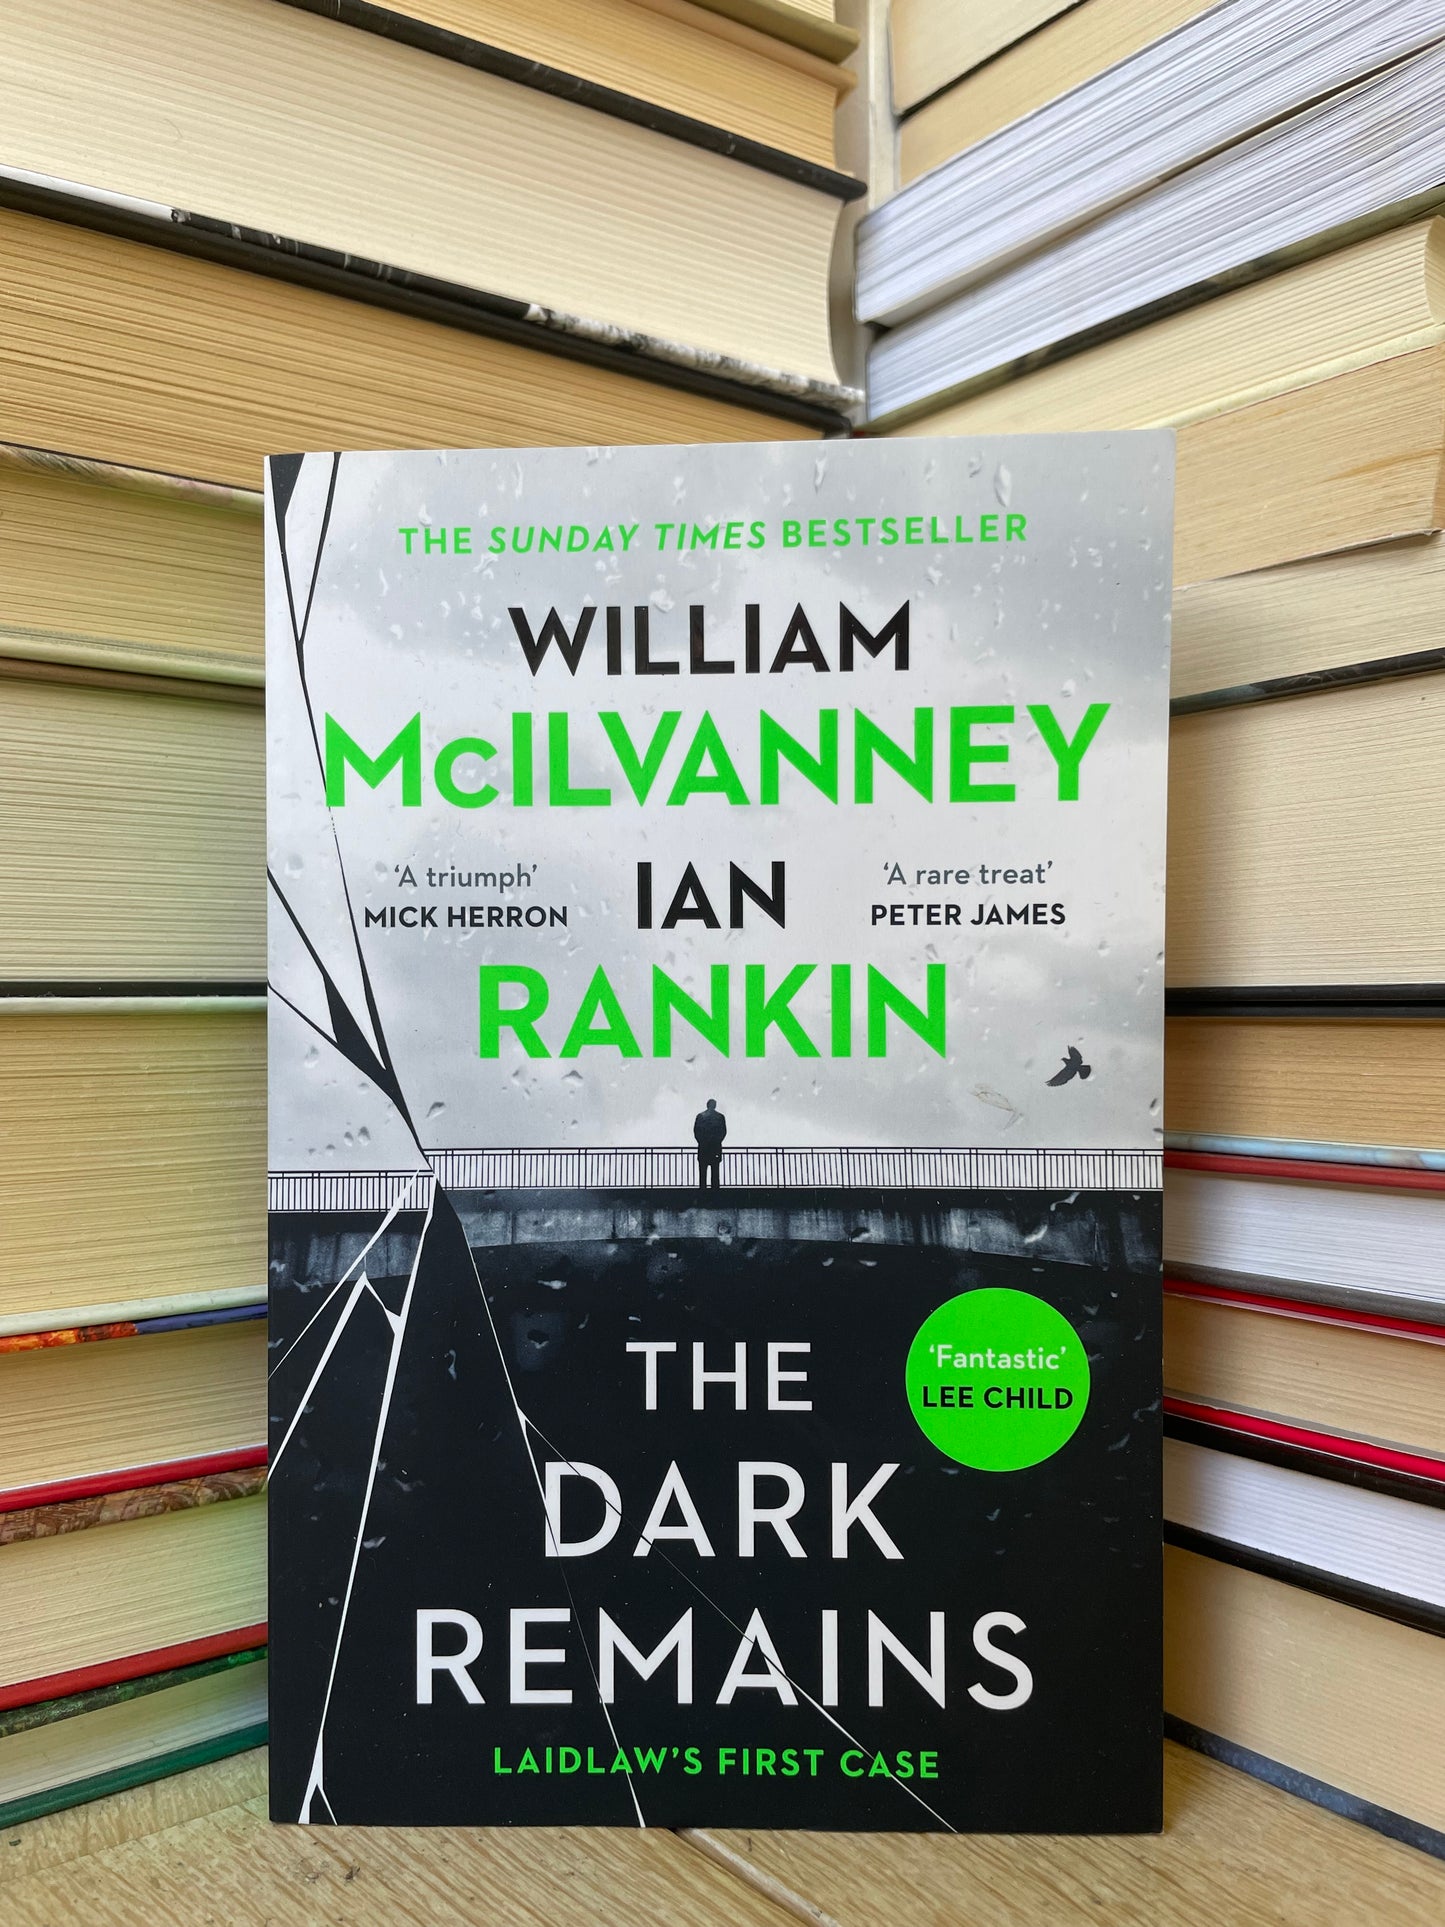 William McIlvanney and Ian Rankin - The Dark Remains